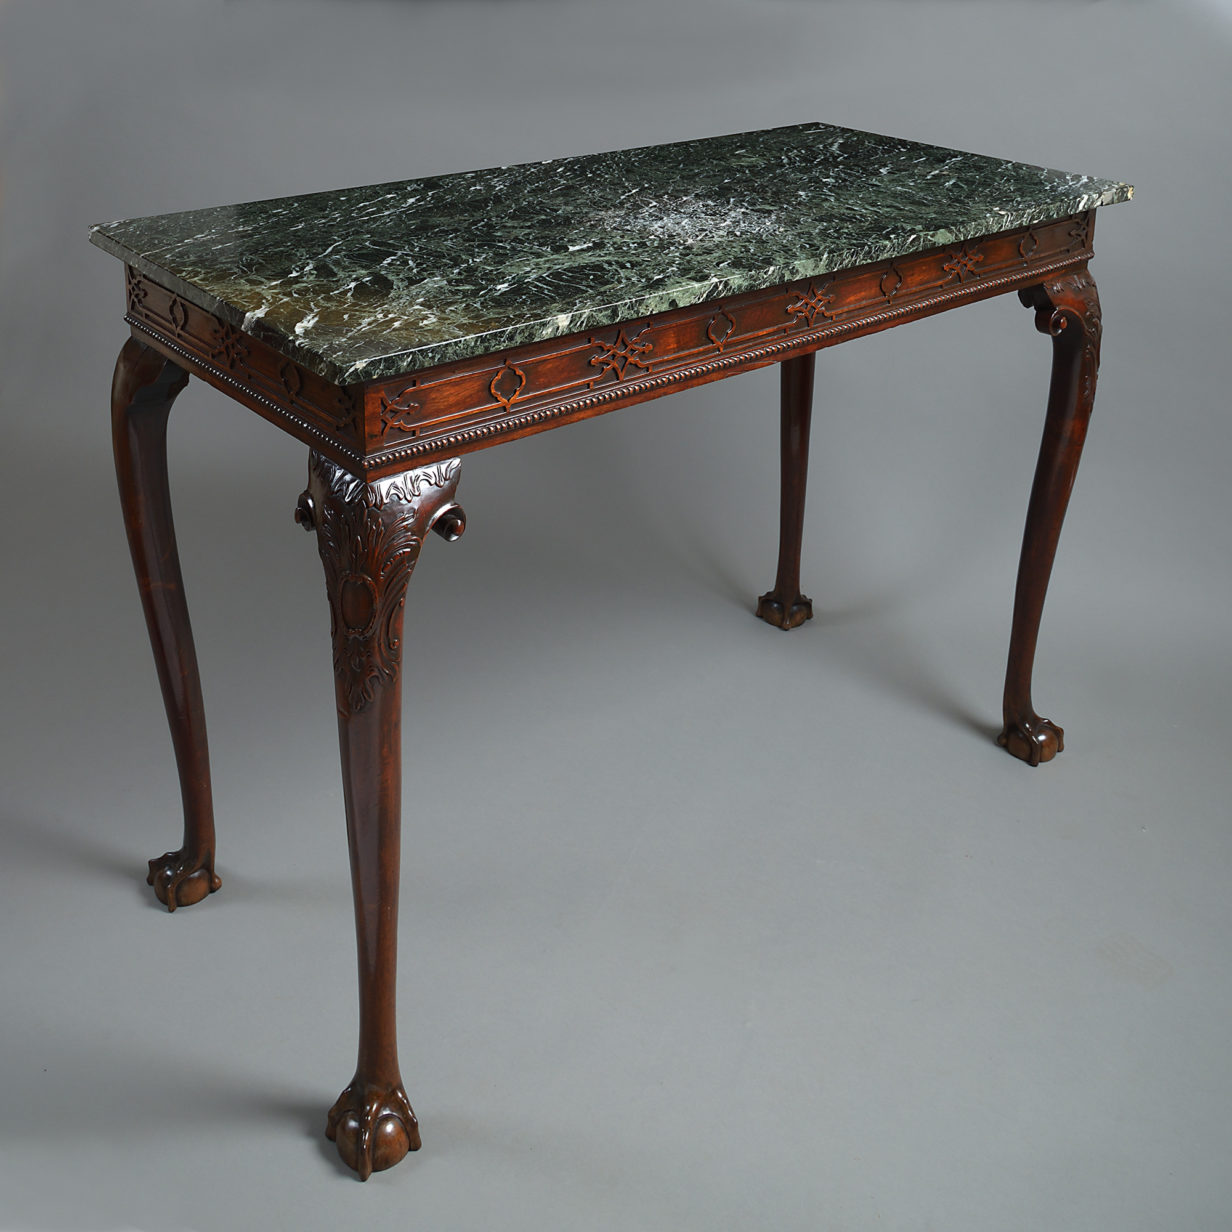 A mid-18th century george iii period mahogany side table